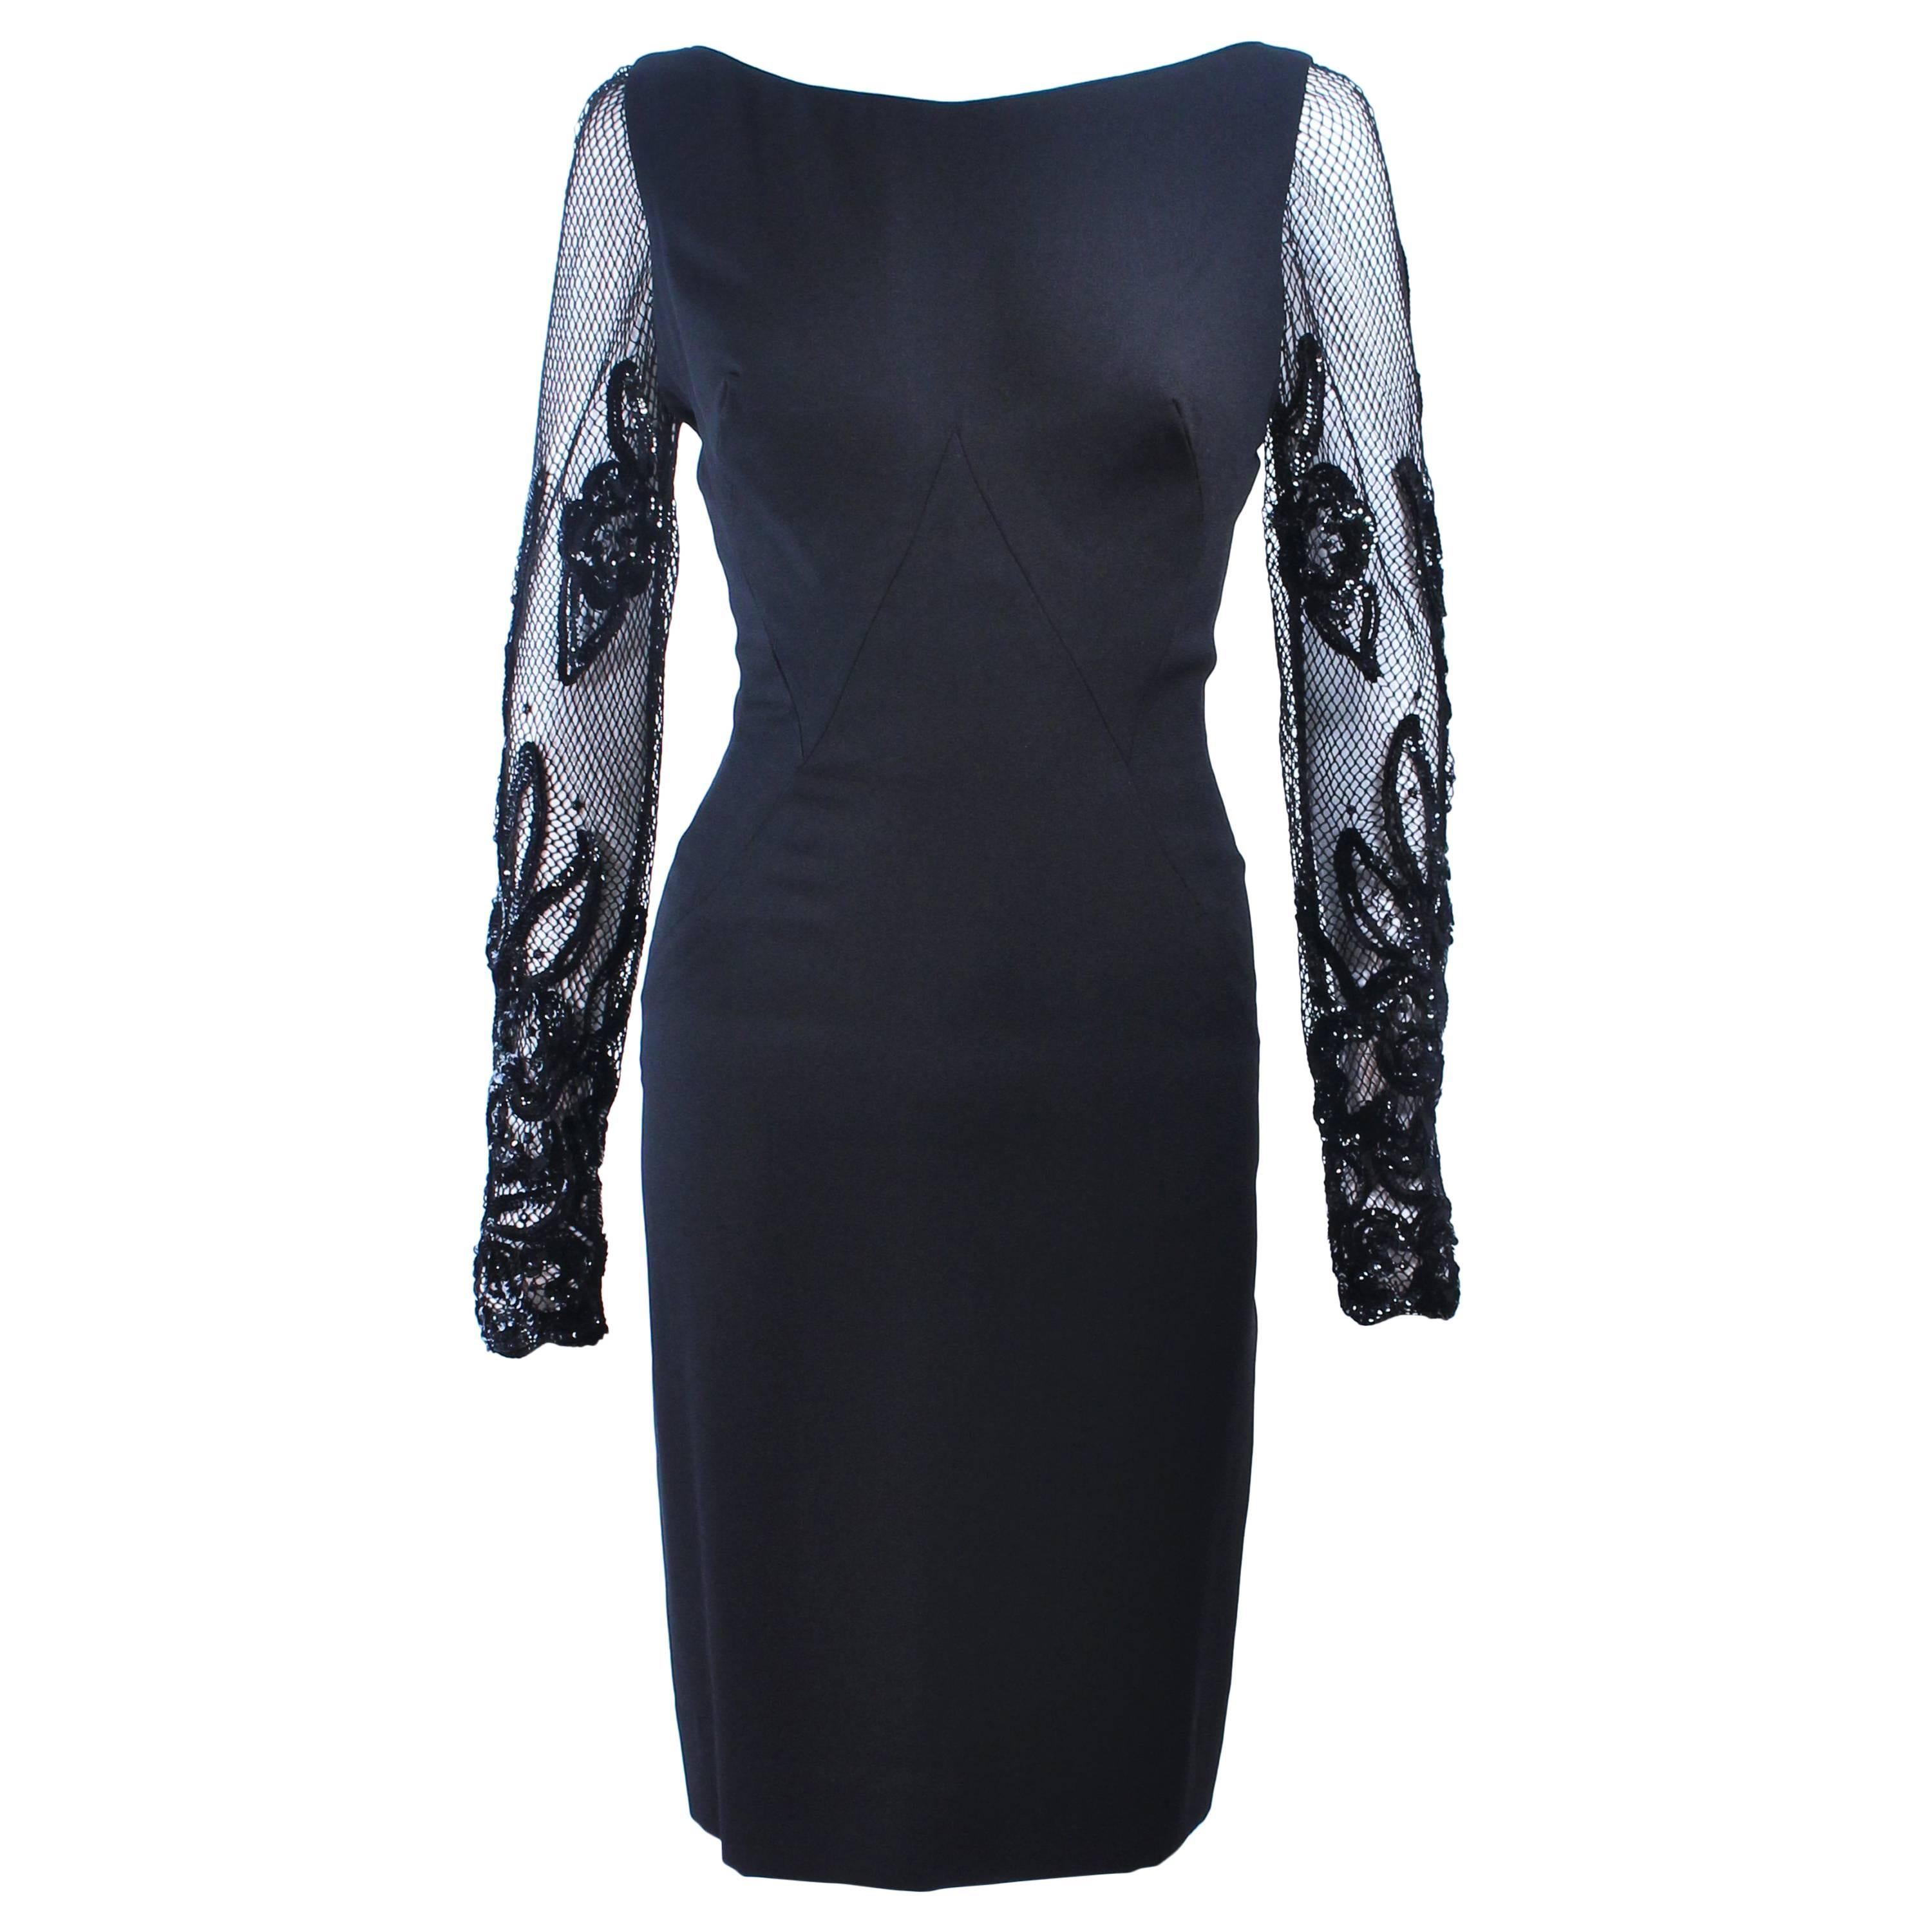 SYDNEY NORTH Black Silk Cocktail Dress with Sequin Mesh Sleeves Size 6 8 For Sale